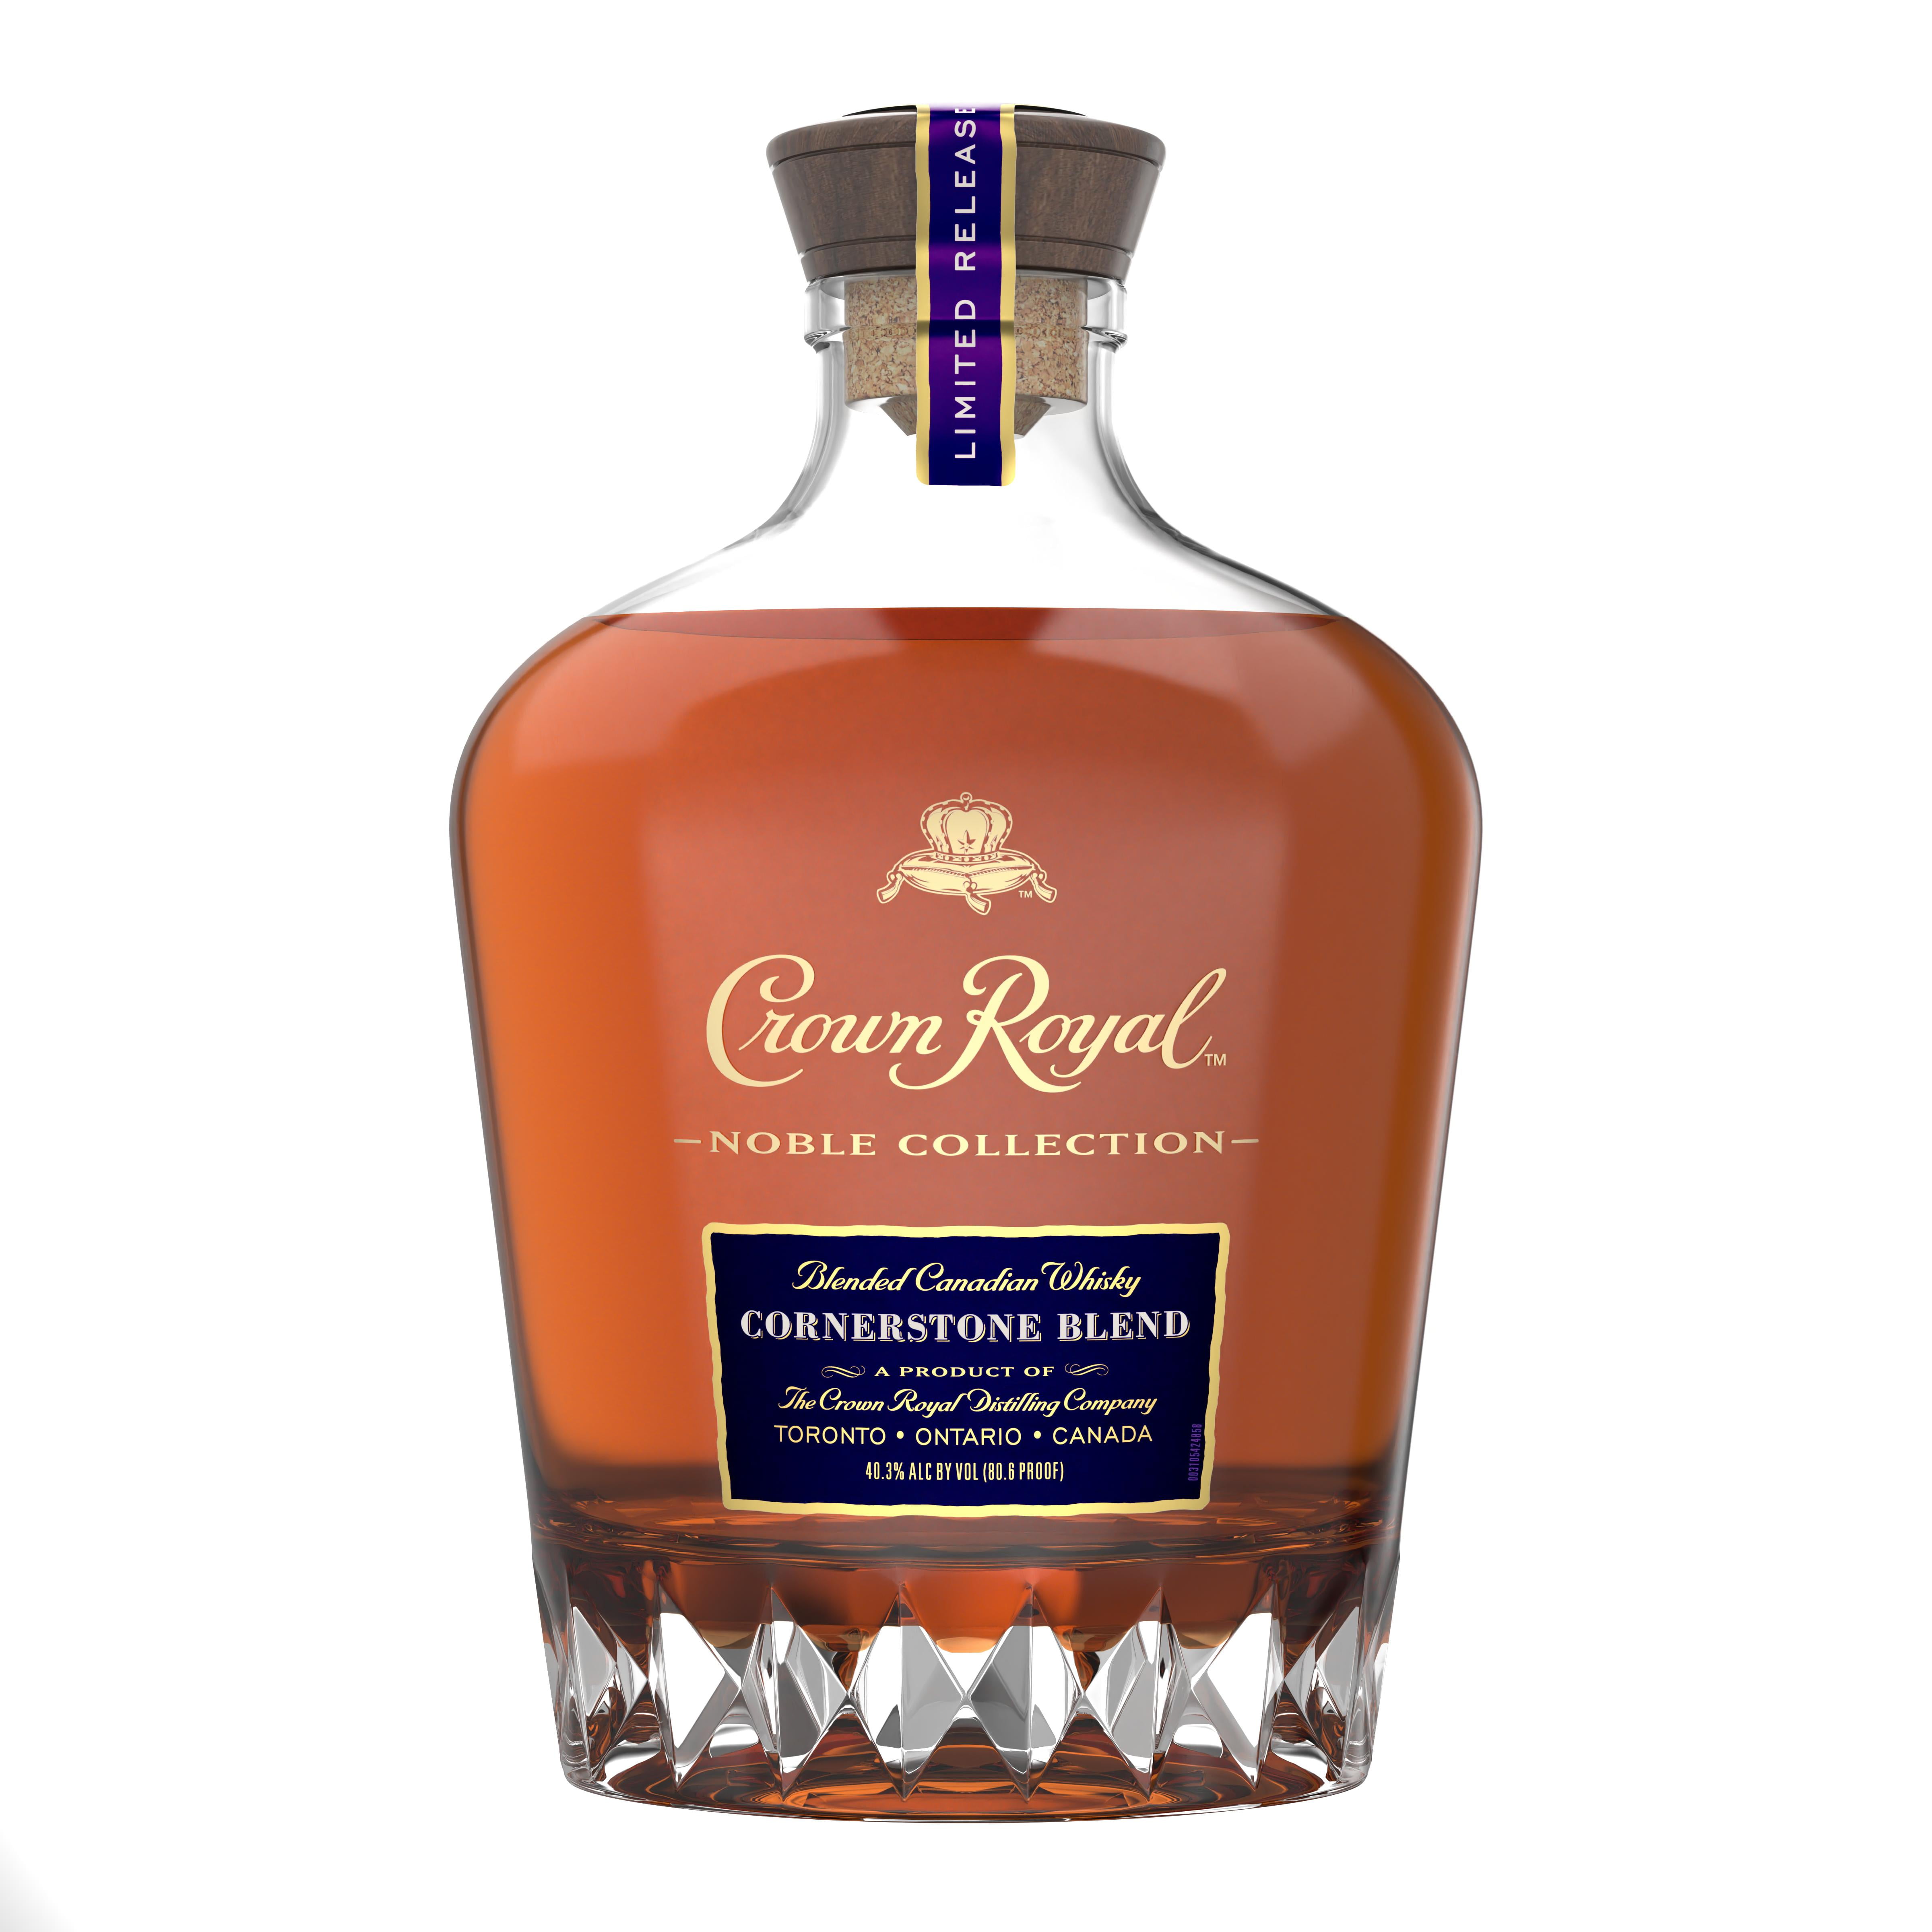 Crown Royal Noble Collection Cornerstone Blend Blended Canadian Whisky